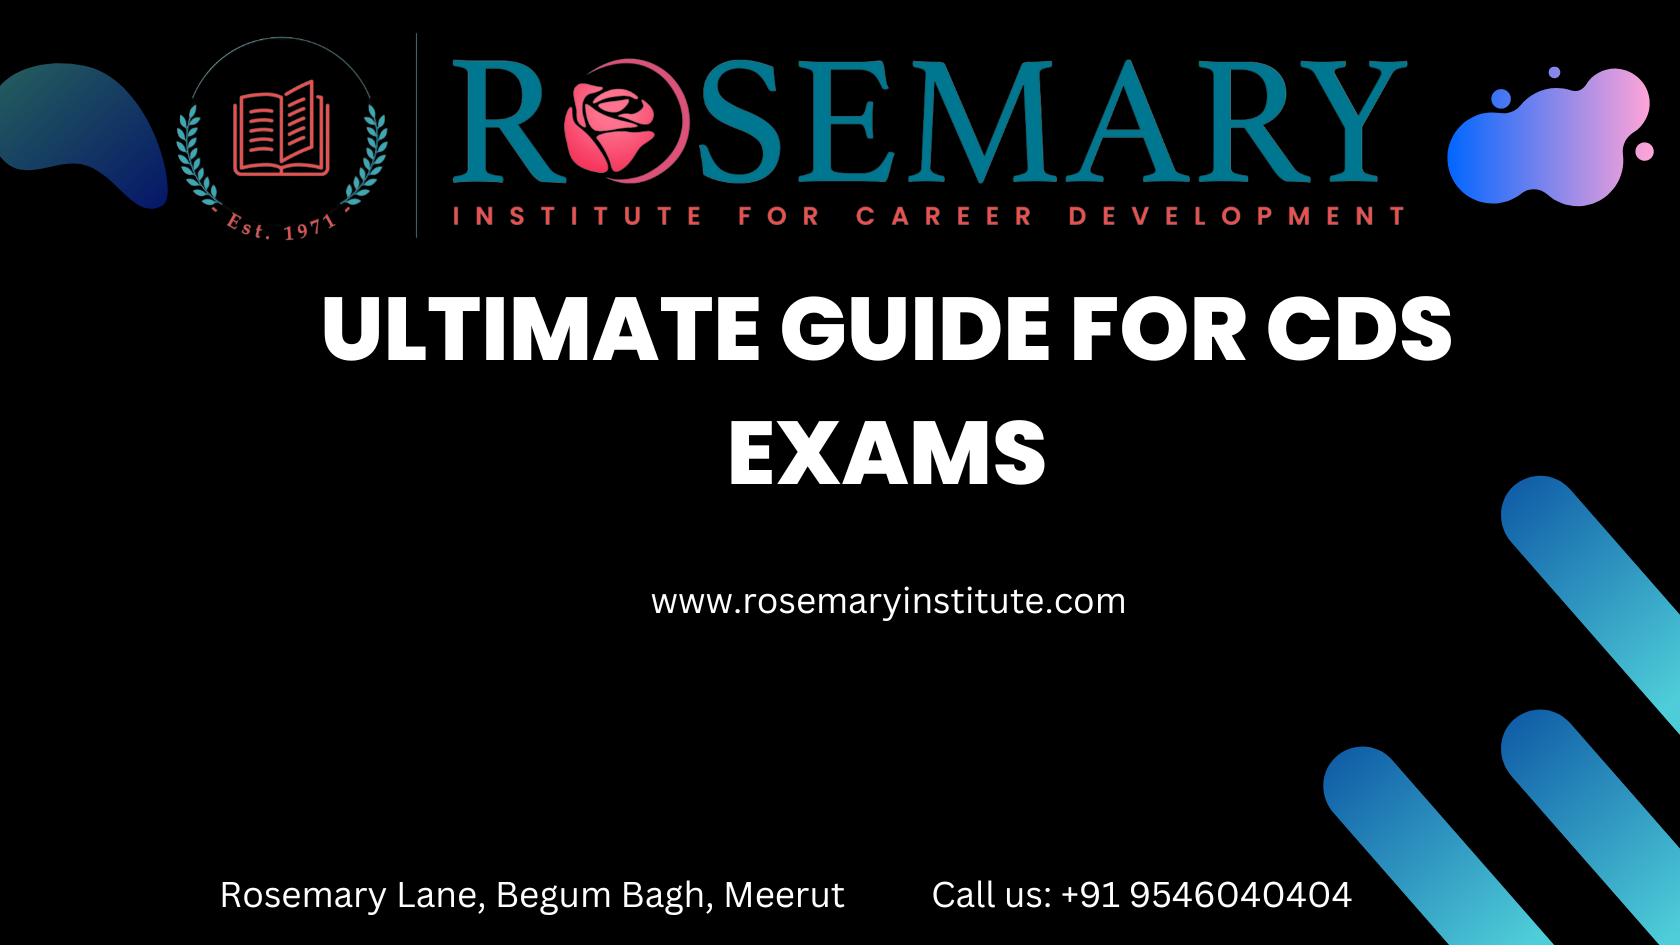 The Ultimate Guide for CDS Exam Preparation